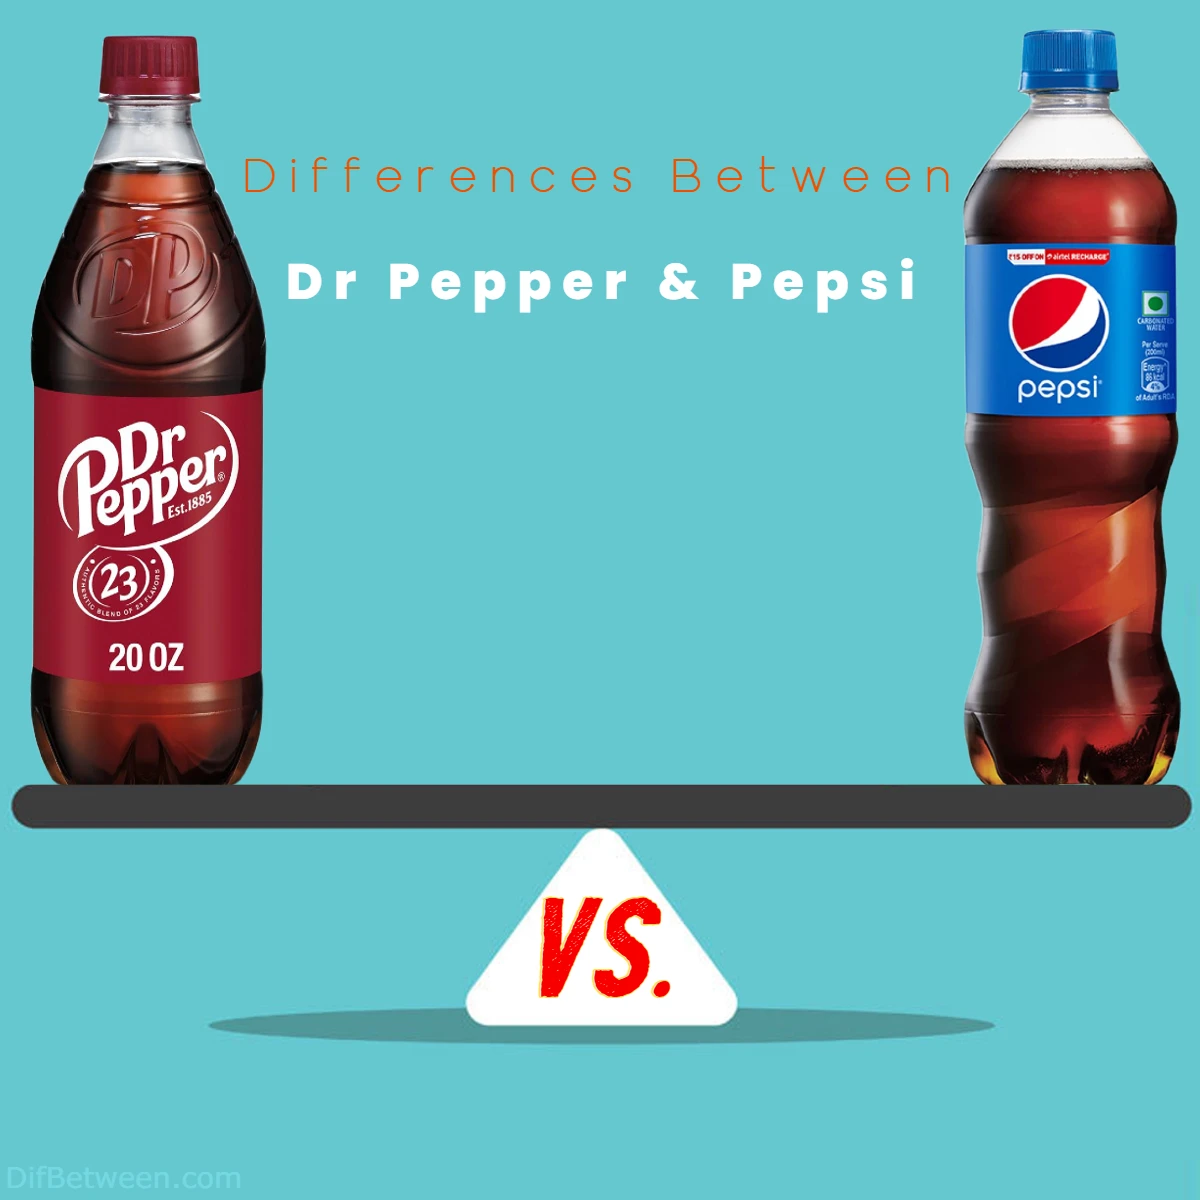 Differences Between Pepsi and Dr Pepper